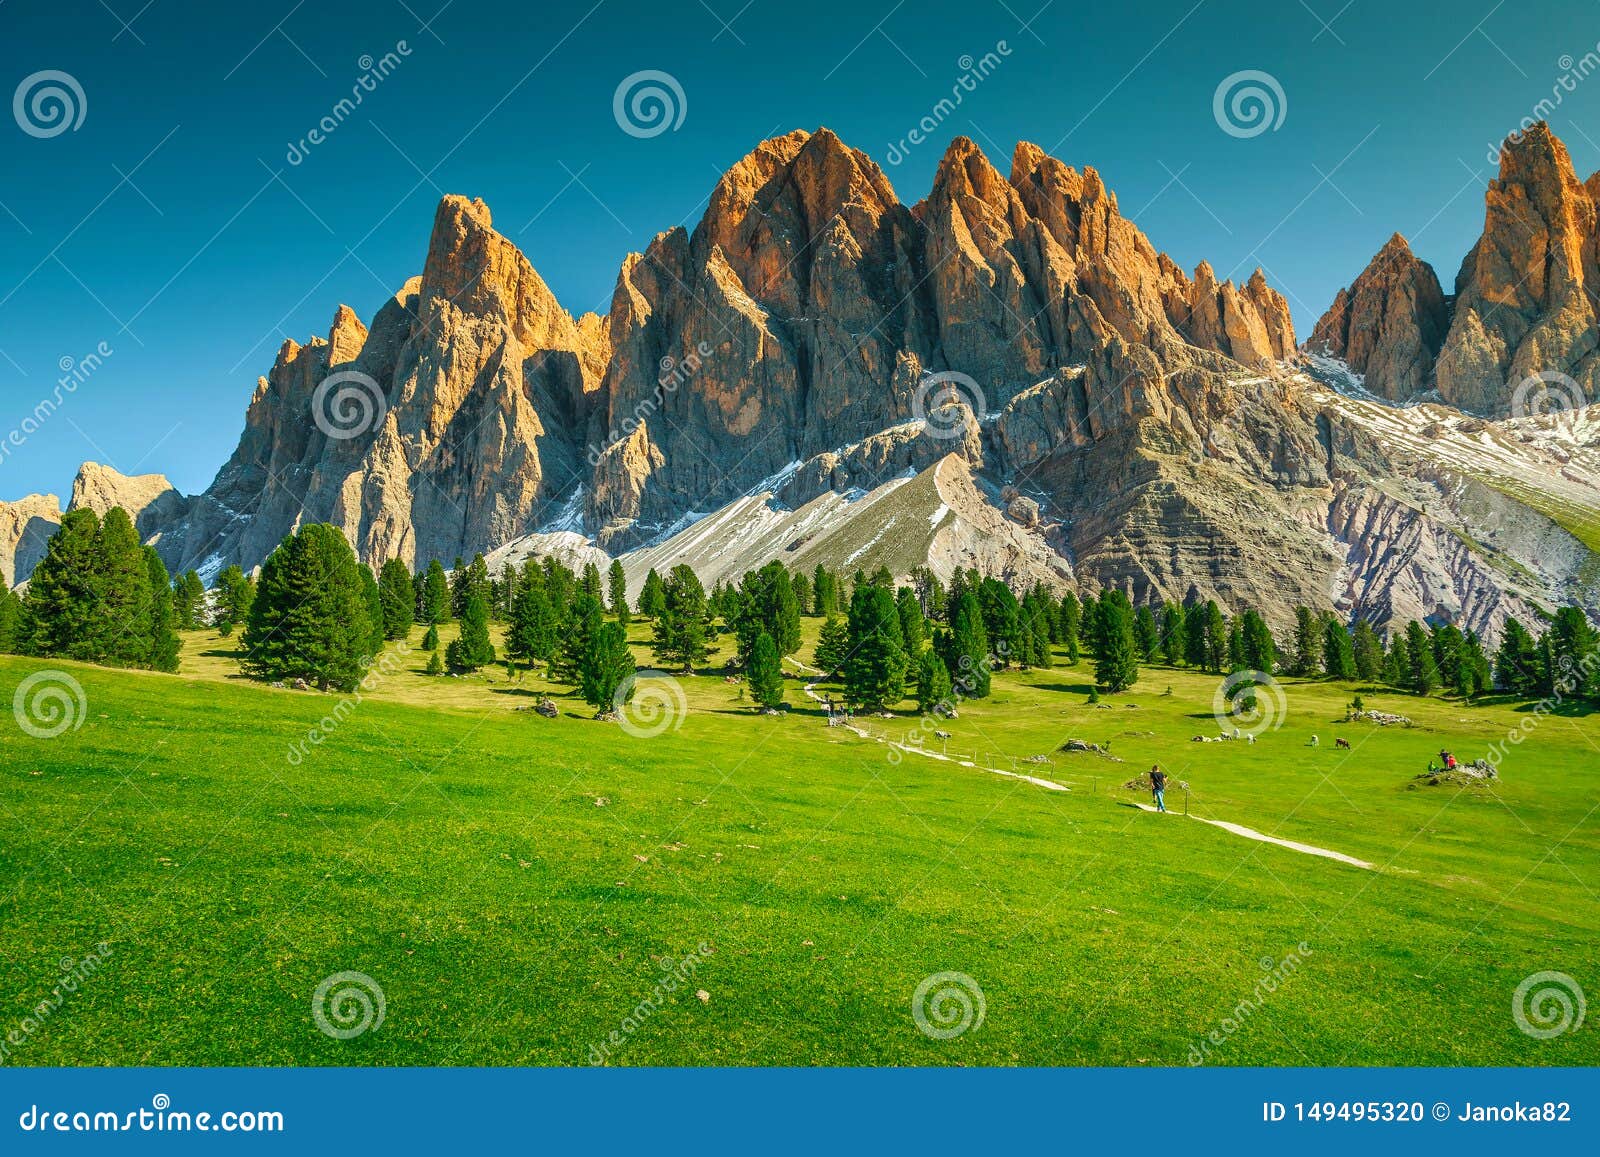 8x6.5FT SZZWY Vinyl Photography Background Mountains and Meadow Dolomite National Park Italy Green Grassfield Mountains Blue Sky Landscape Backdrop Children Girls Photo Portrait Shoot Video Prop